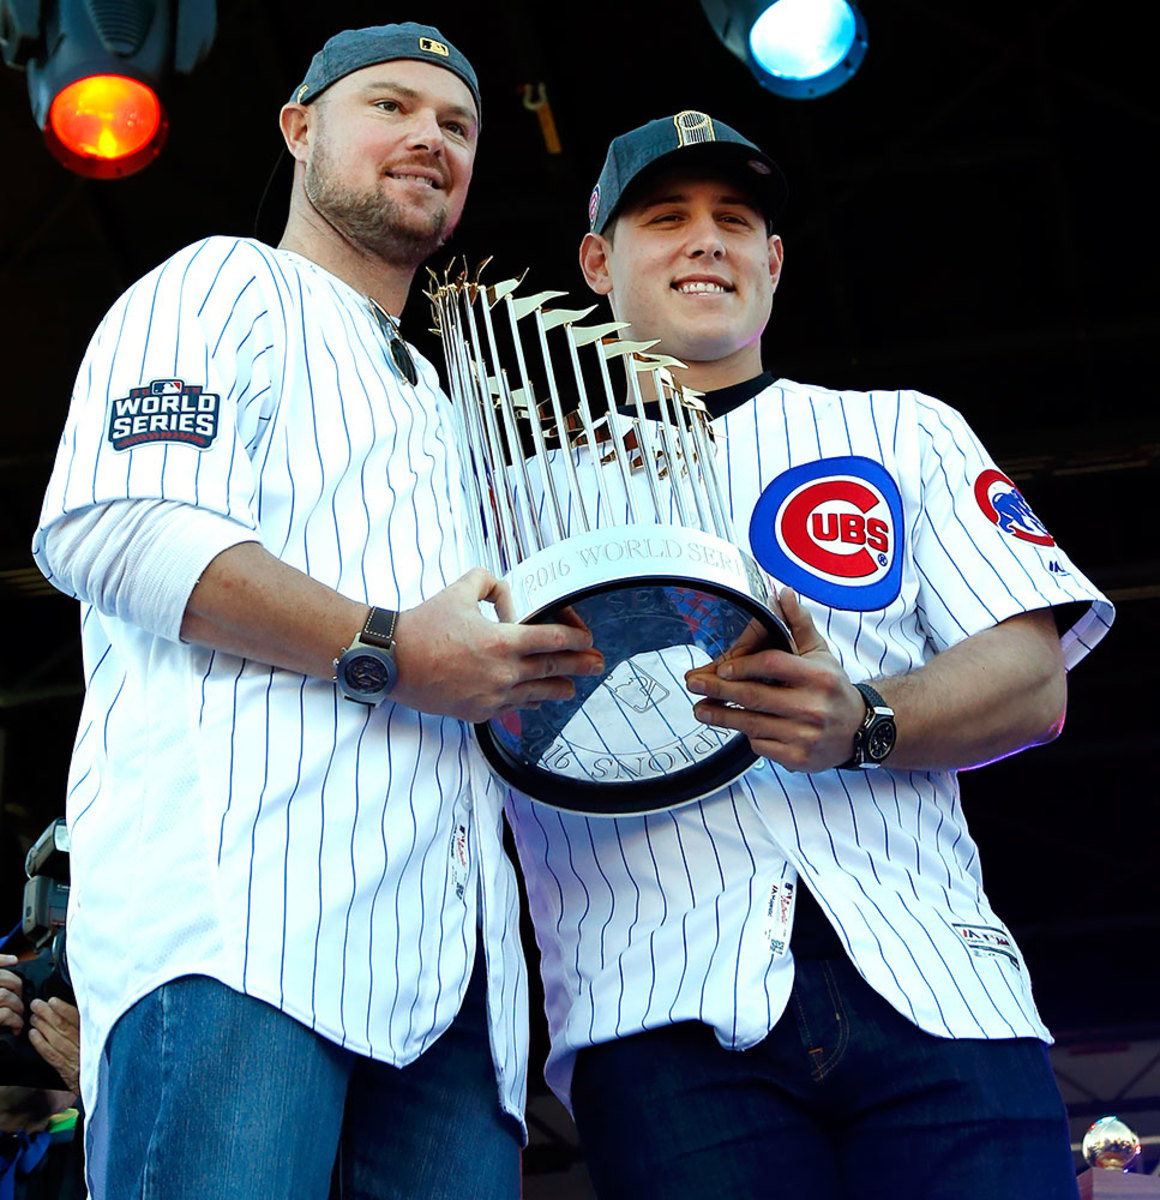 Chicago-Cubs-Victory-Parade-Jon-Lester-Anthony-Rizzo-c82f96bed7104efa948a4ba648557c1a-0.jpg